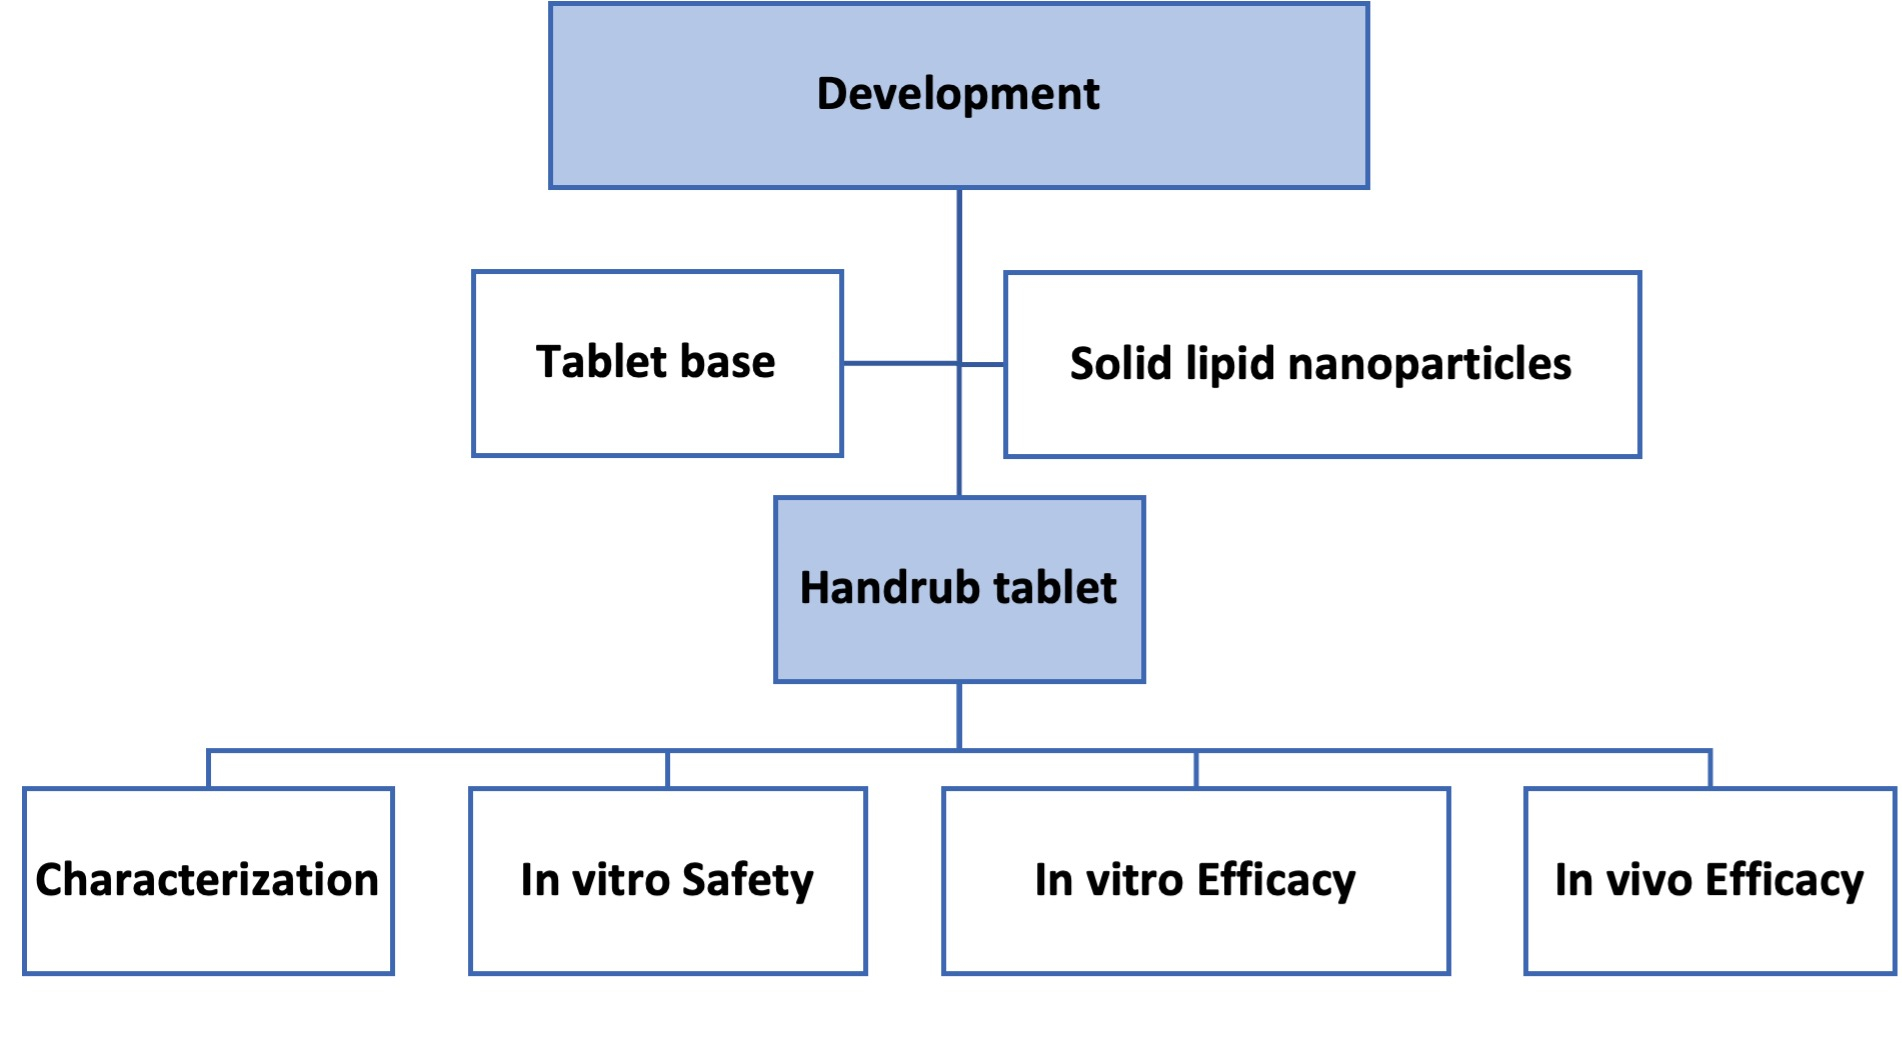 A Novel Handrub Tablet Loaded with Pre- and Post-Biotic Solid Lipid Nanoparticles Combining Virucidal Activity and Maintenance of the Skin Barrier and Microbiome